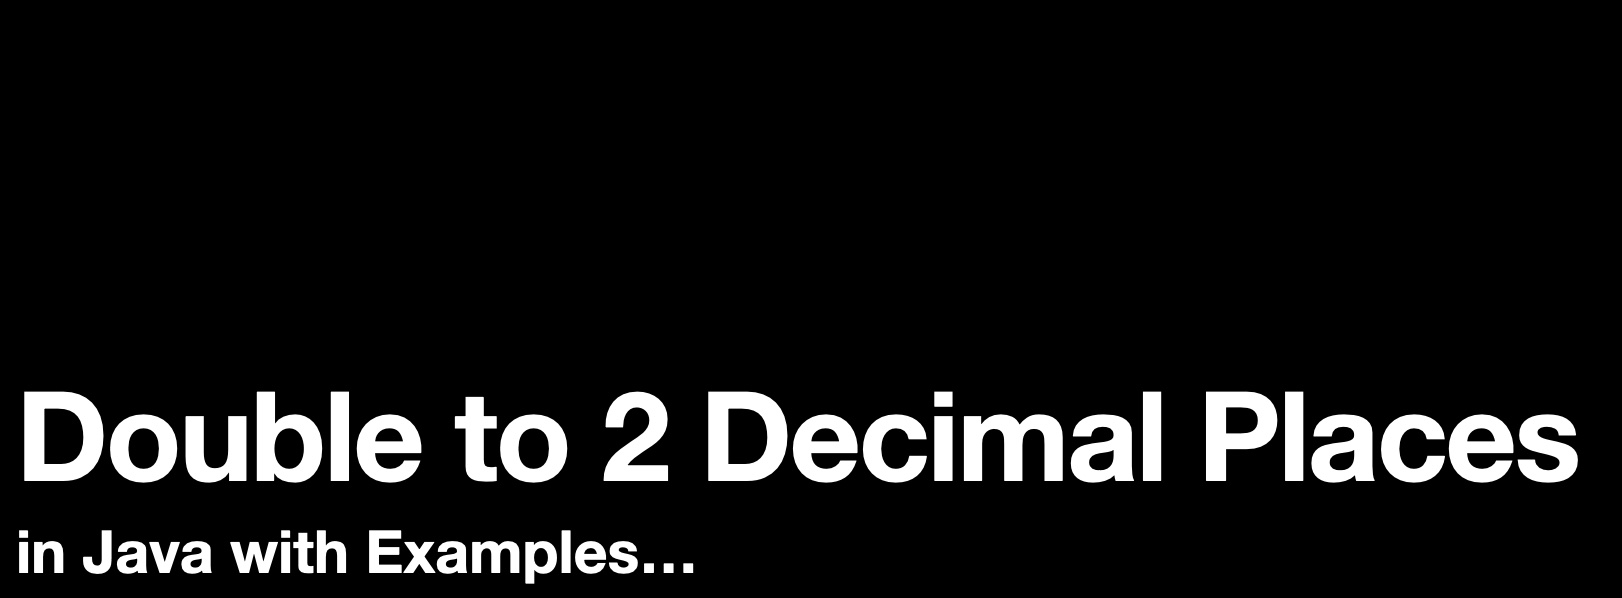 Double to 2 Decimal Places in Java with Examples - Tutorial